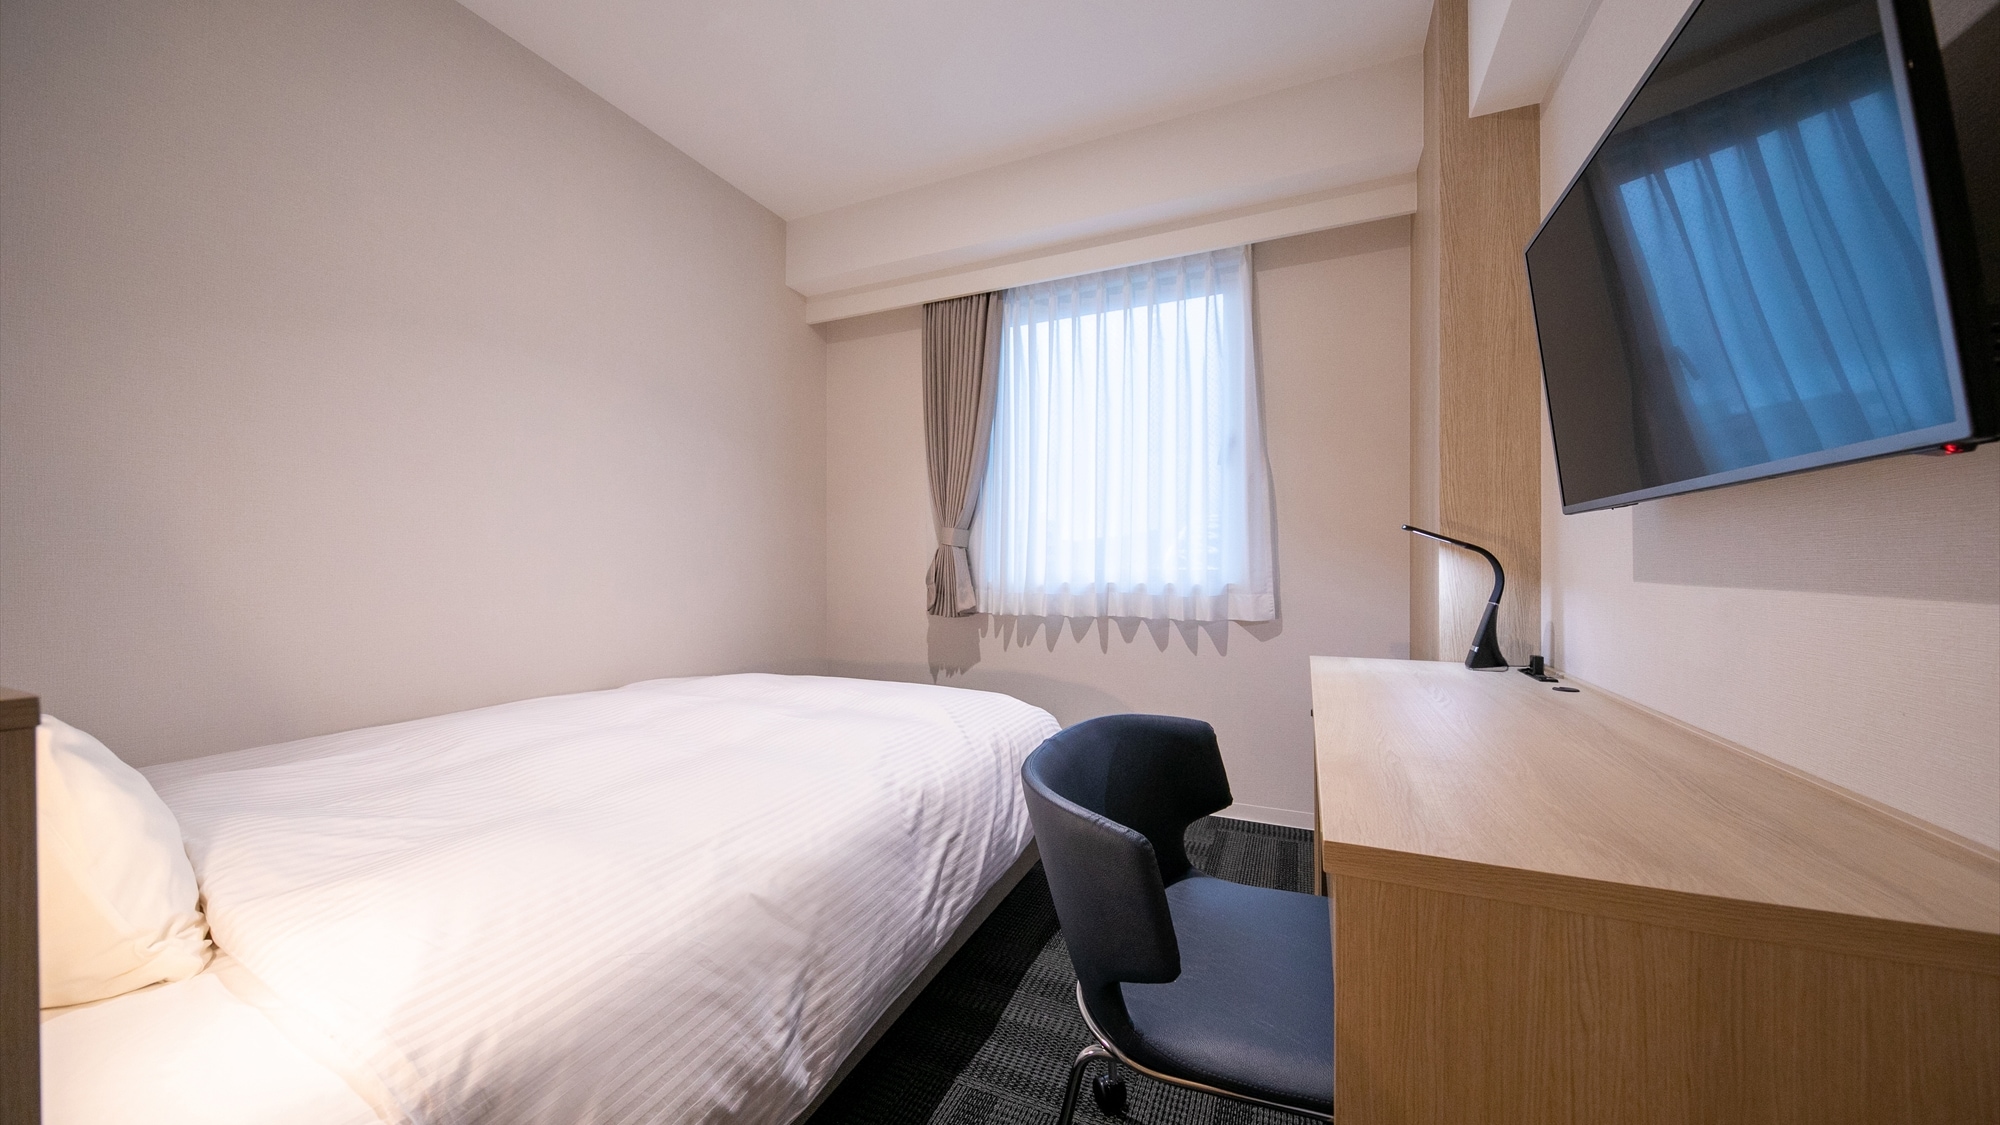 [Double room] A double bed (140 cm wide) is placed in a spacious 16 m2 room.